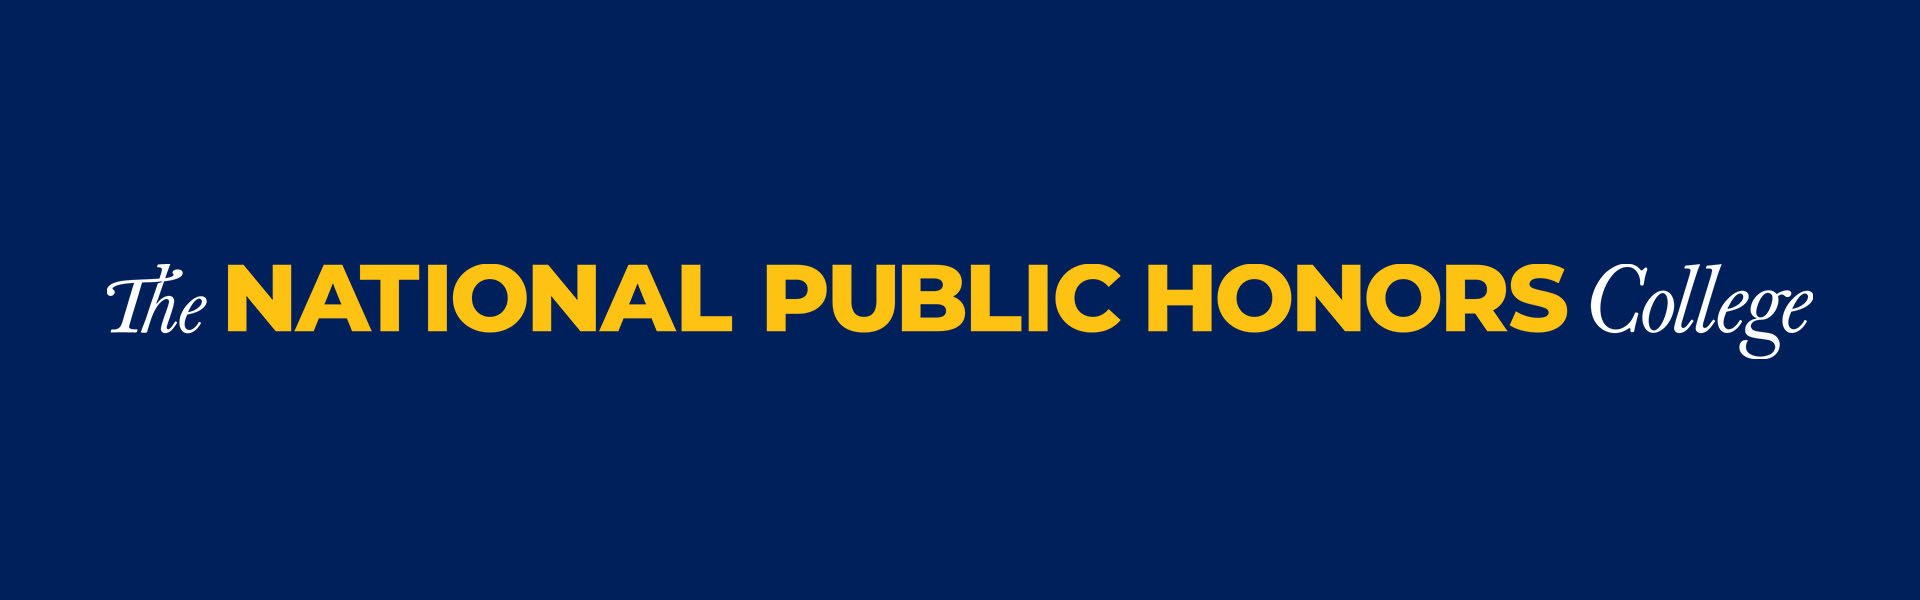 The National Public Honors College Logo